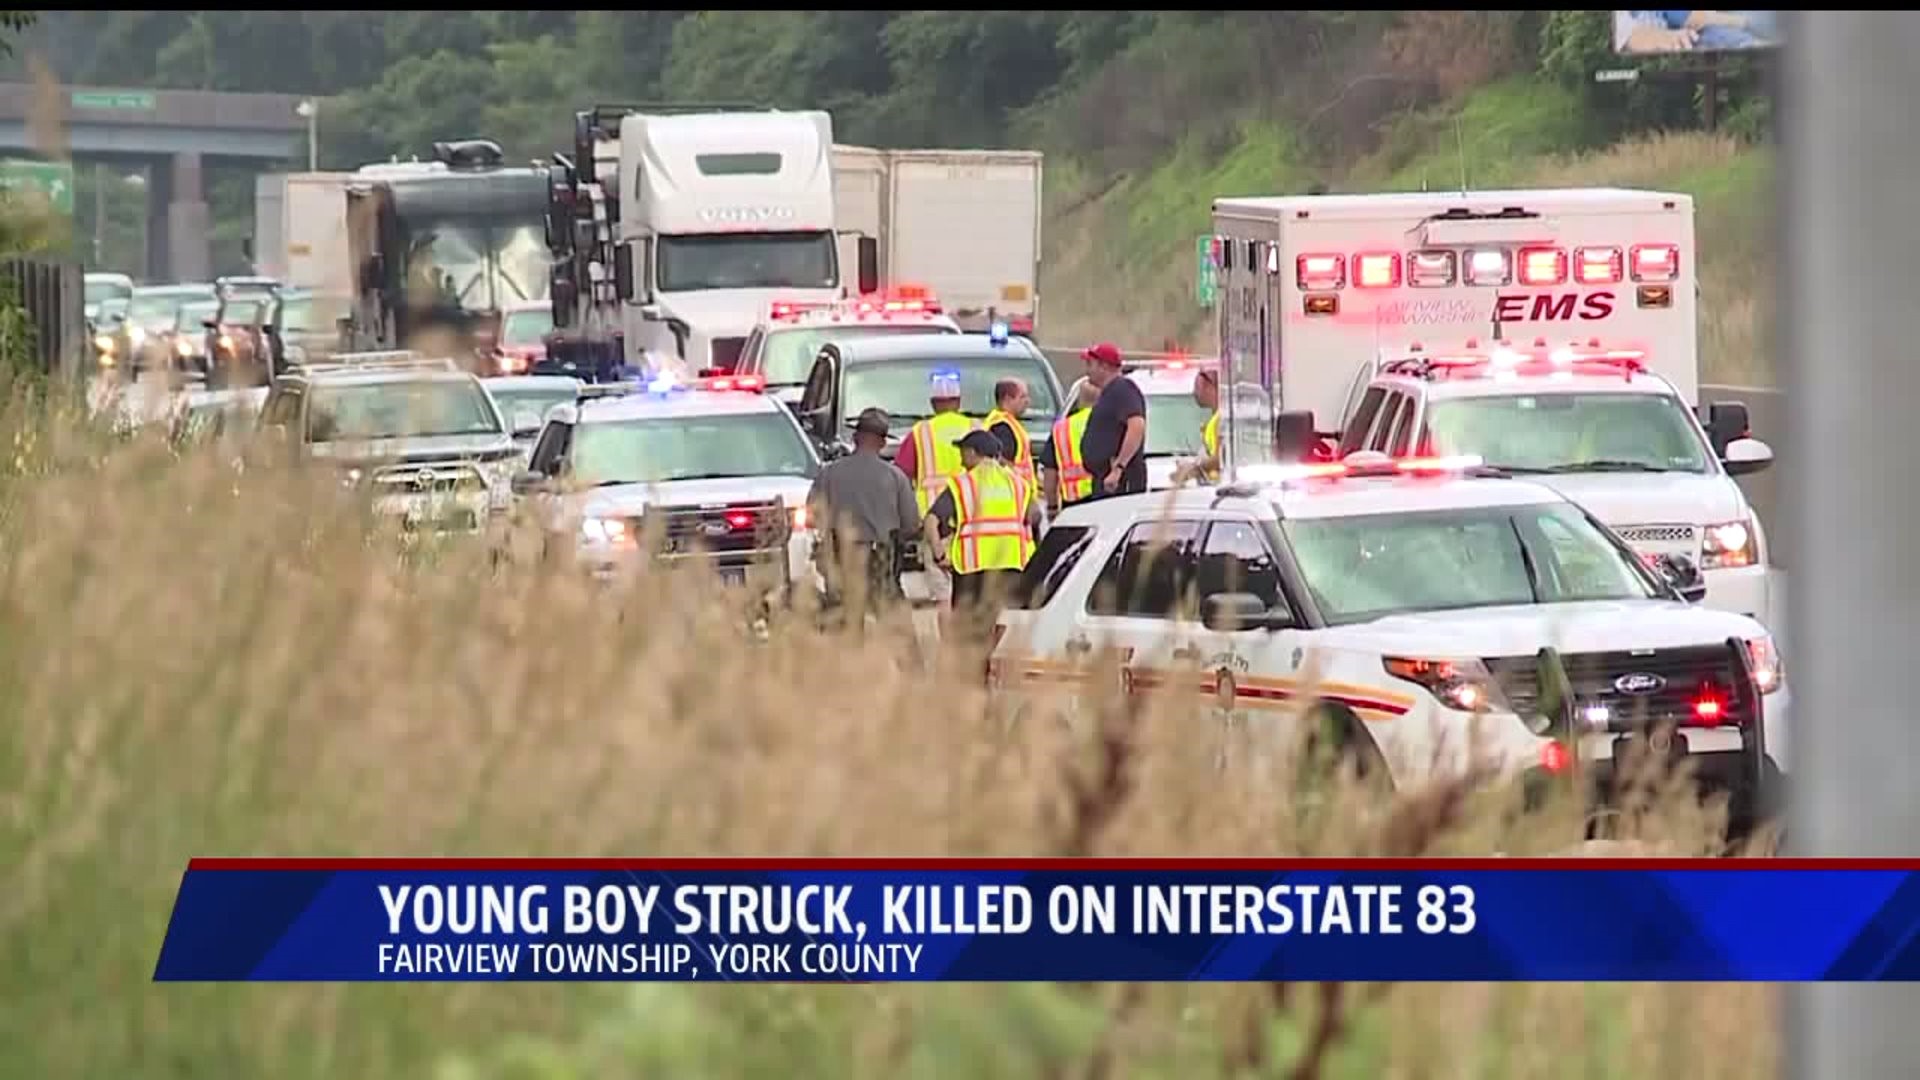 Six-year-old boy dies in vehicle accident on I-83 in York County